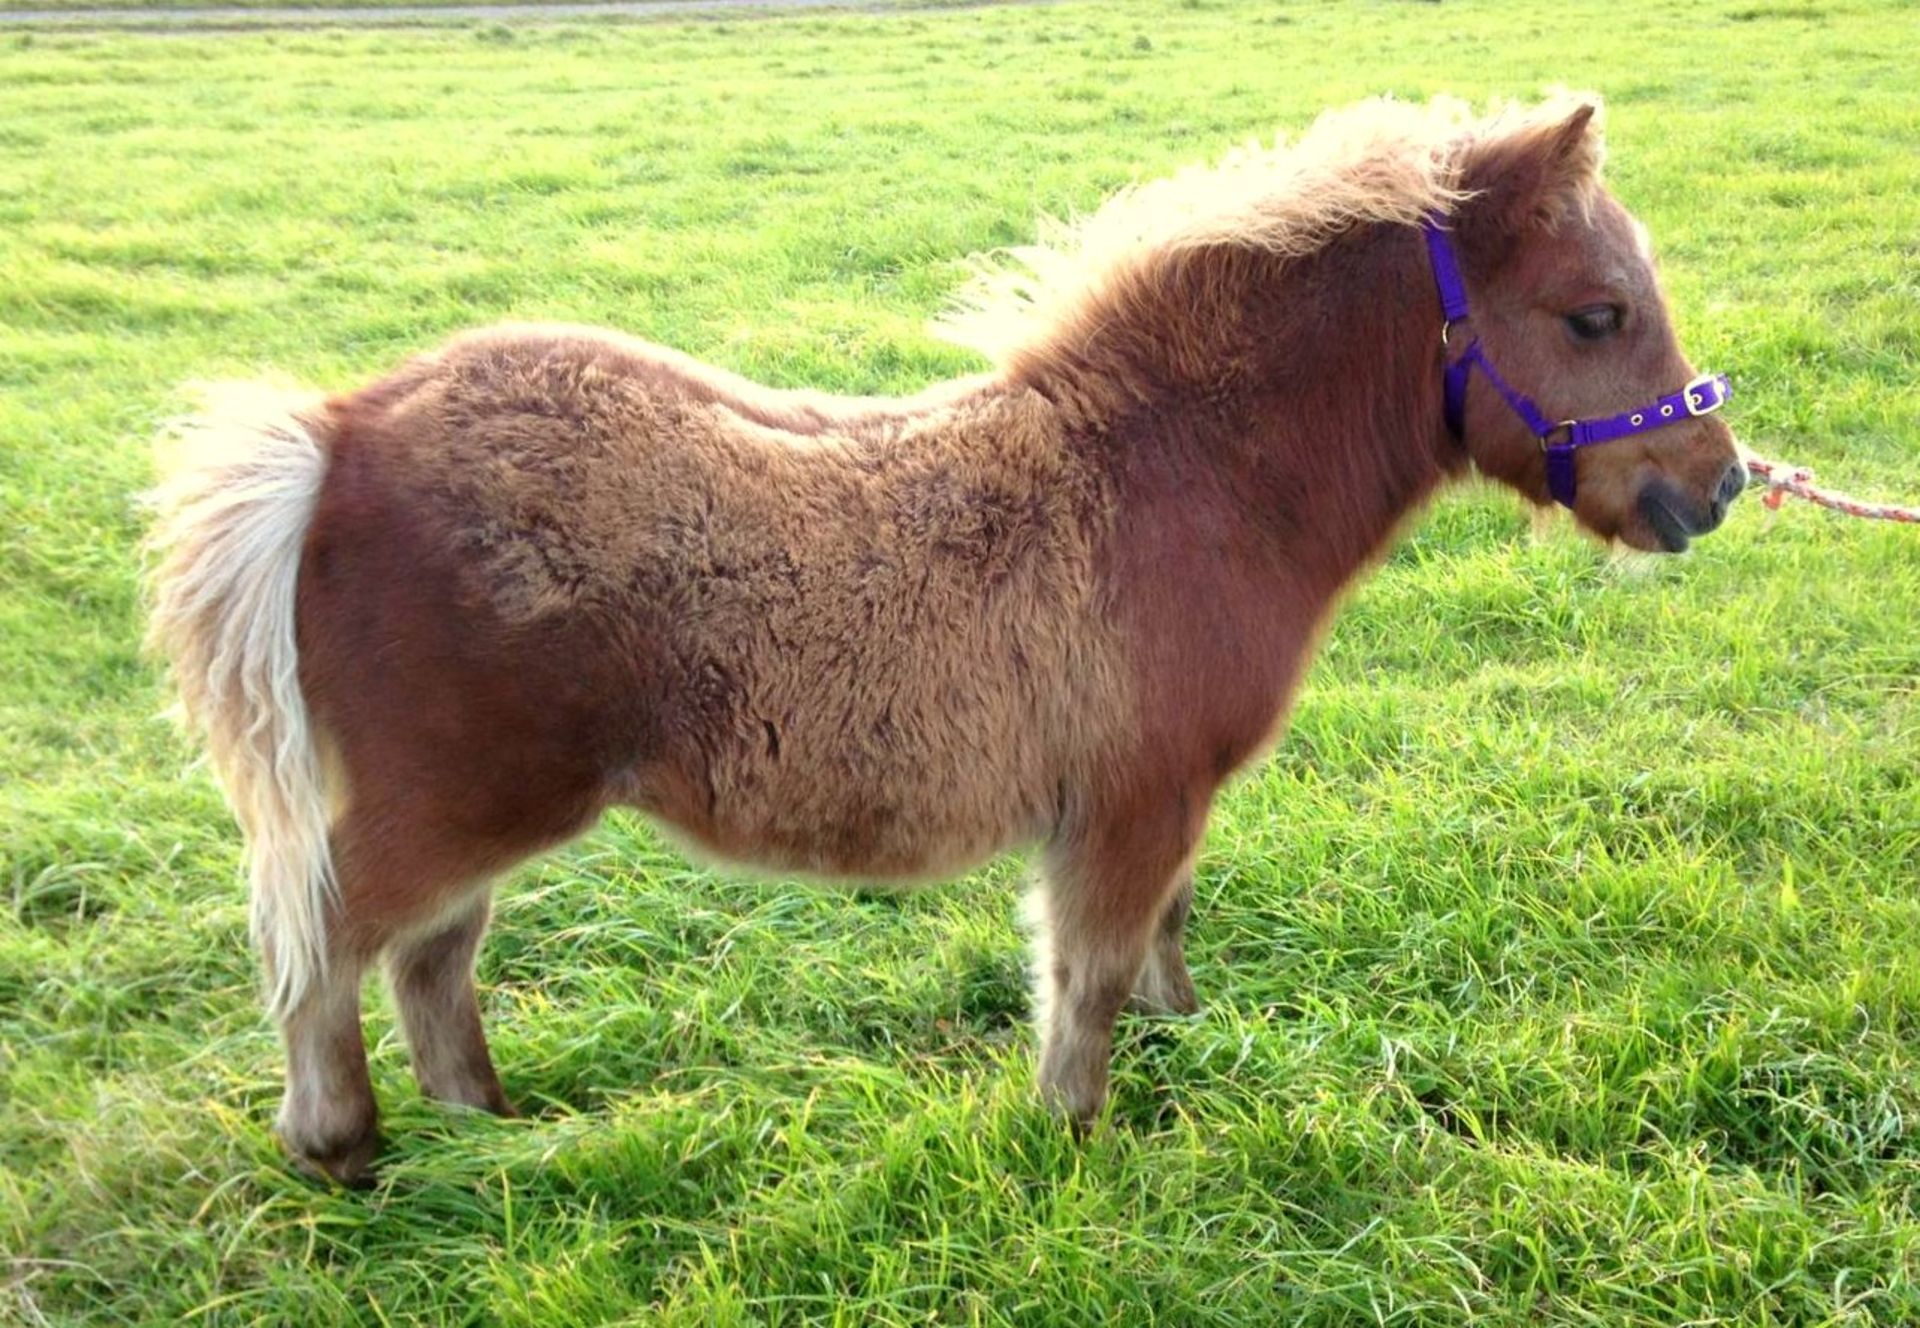 Chestnut Small White Star - Standard - Colt Foal, - DOB: 25th May 2018